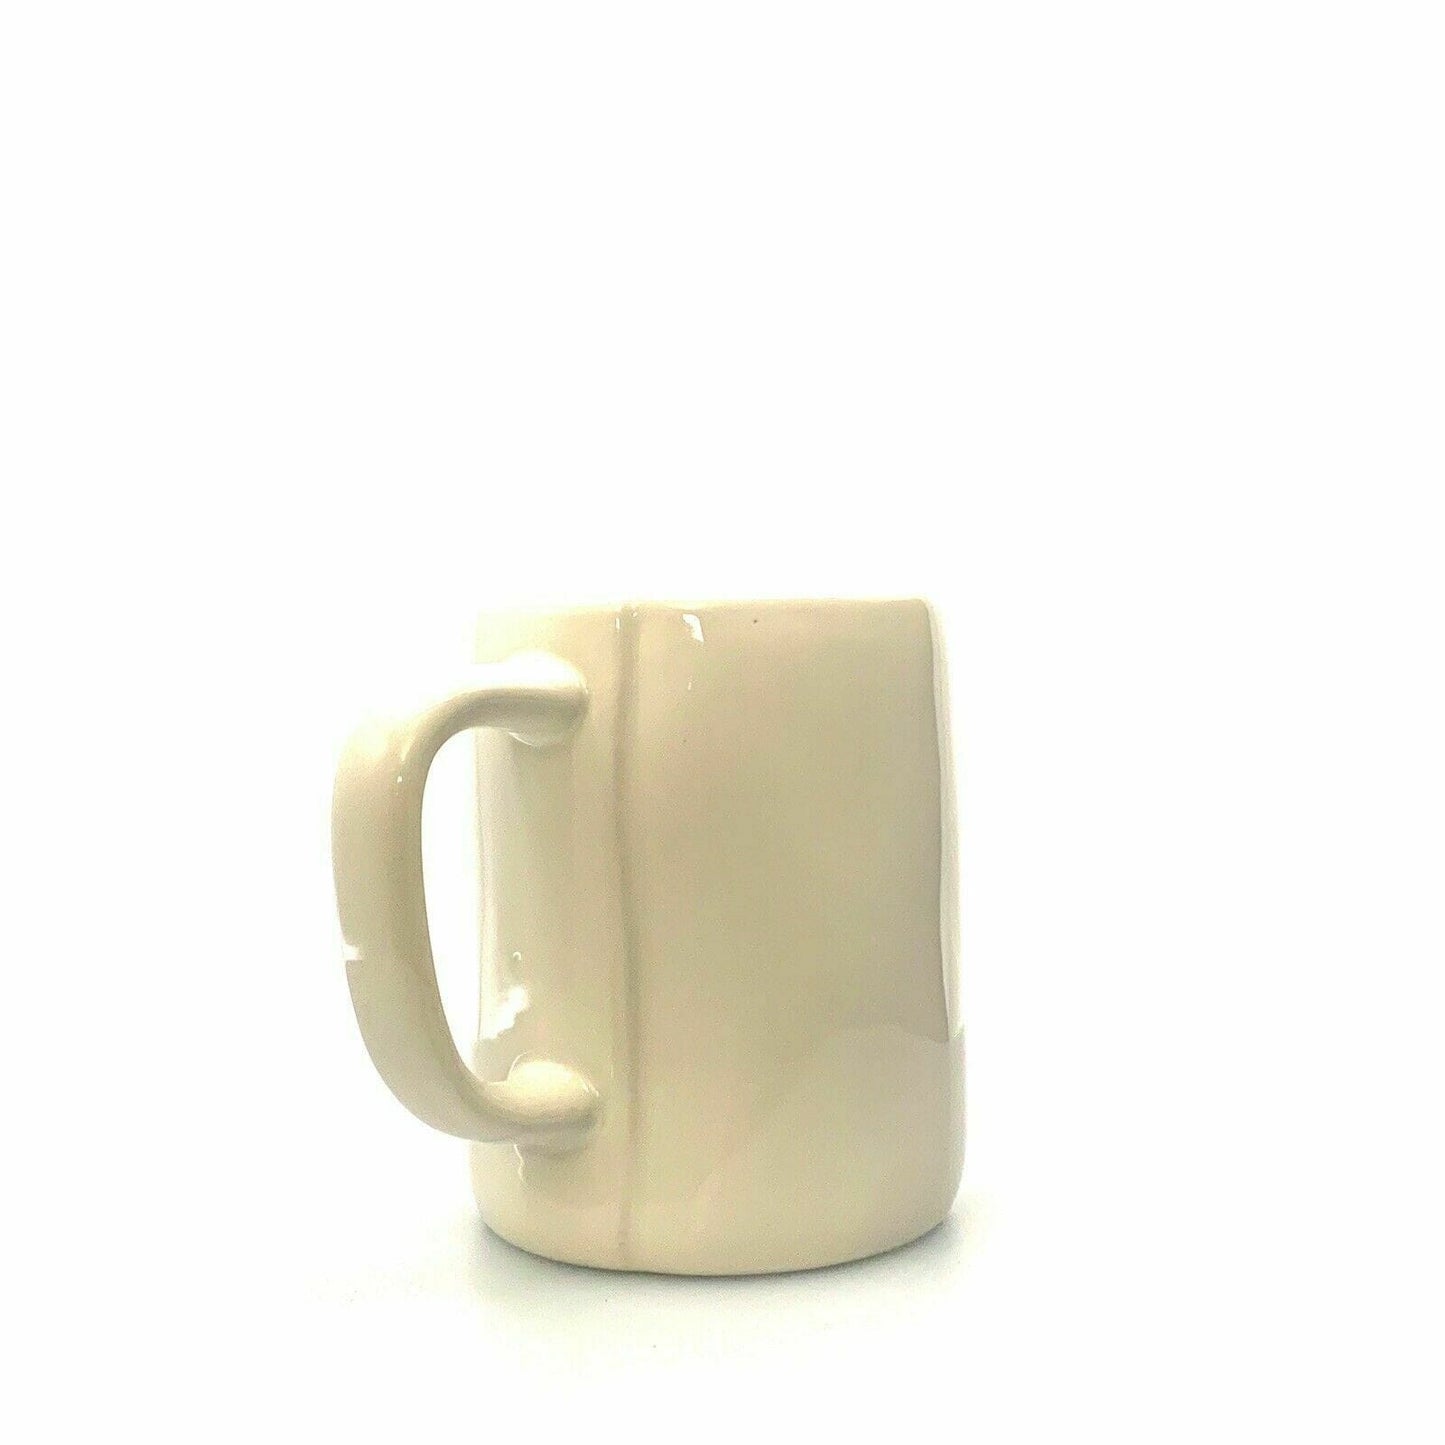 Rae Dunn Artisan Collection "DUNN FUND" Large Letter White Coffee Cup Mug By Magenta